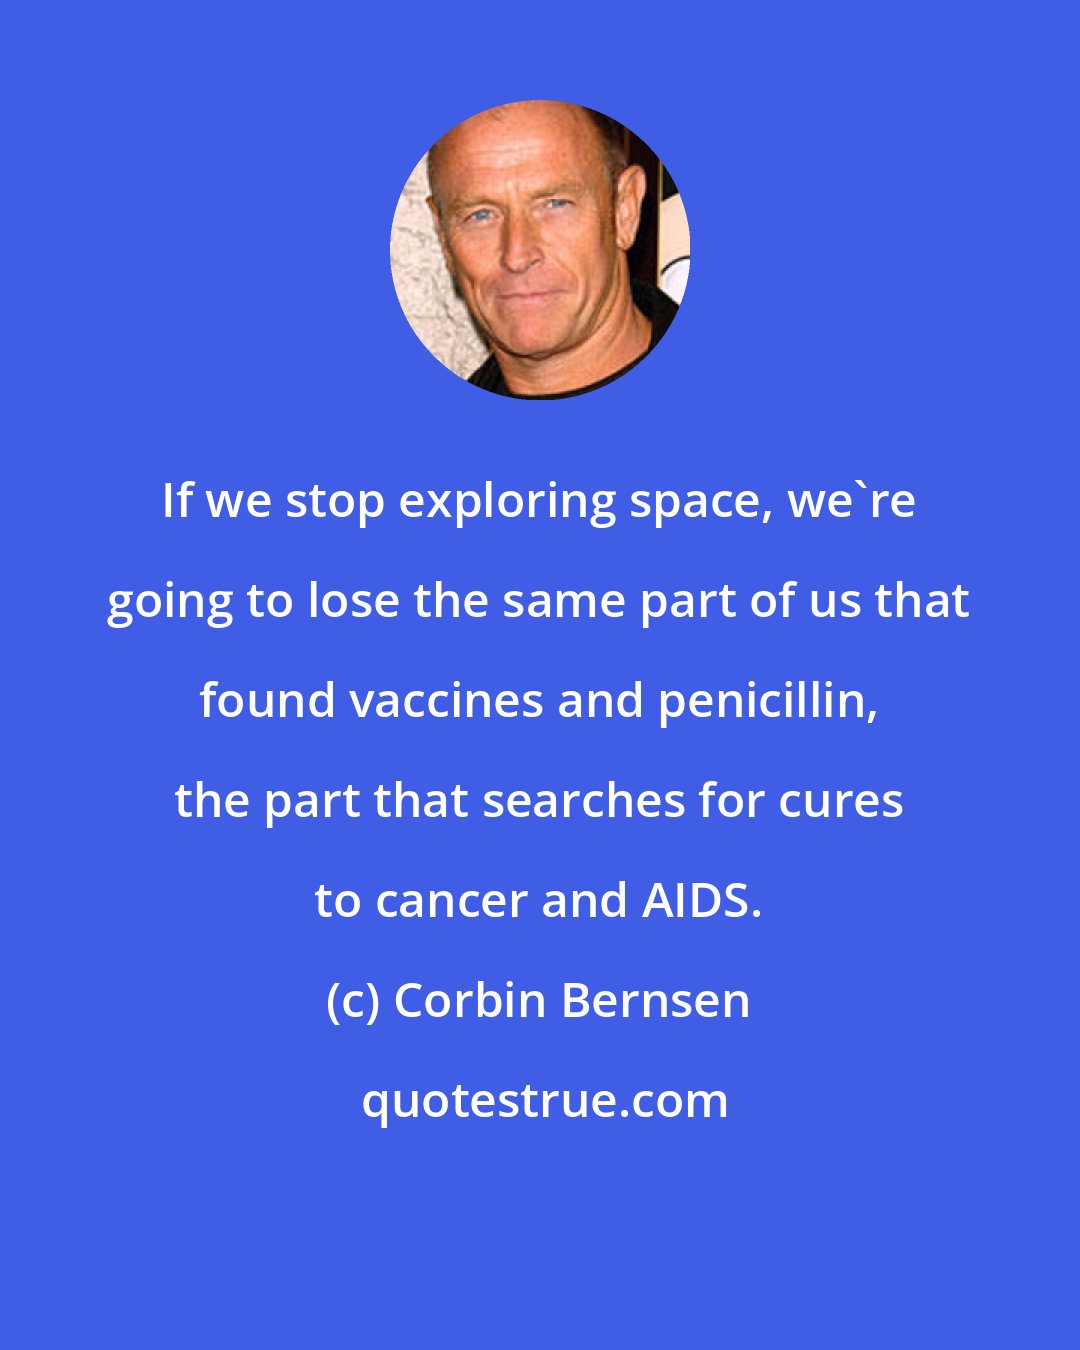 Corbin Bernsen: If we stop exploring space, we're going to lose the same part of us that found vaccines and penicillin, the part that searches for cures to cancer and AIDS.